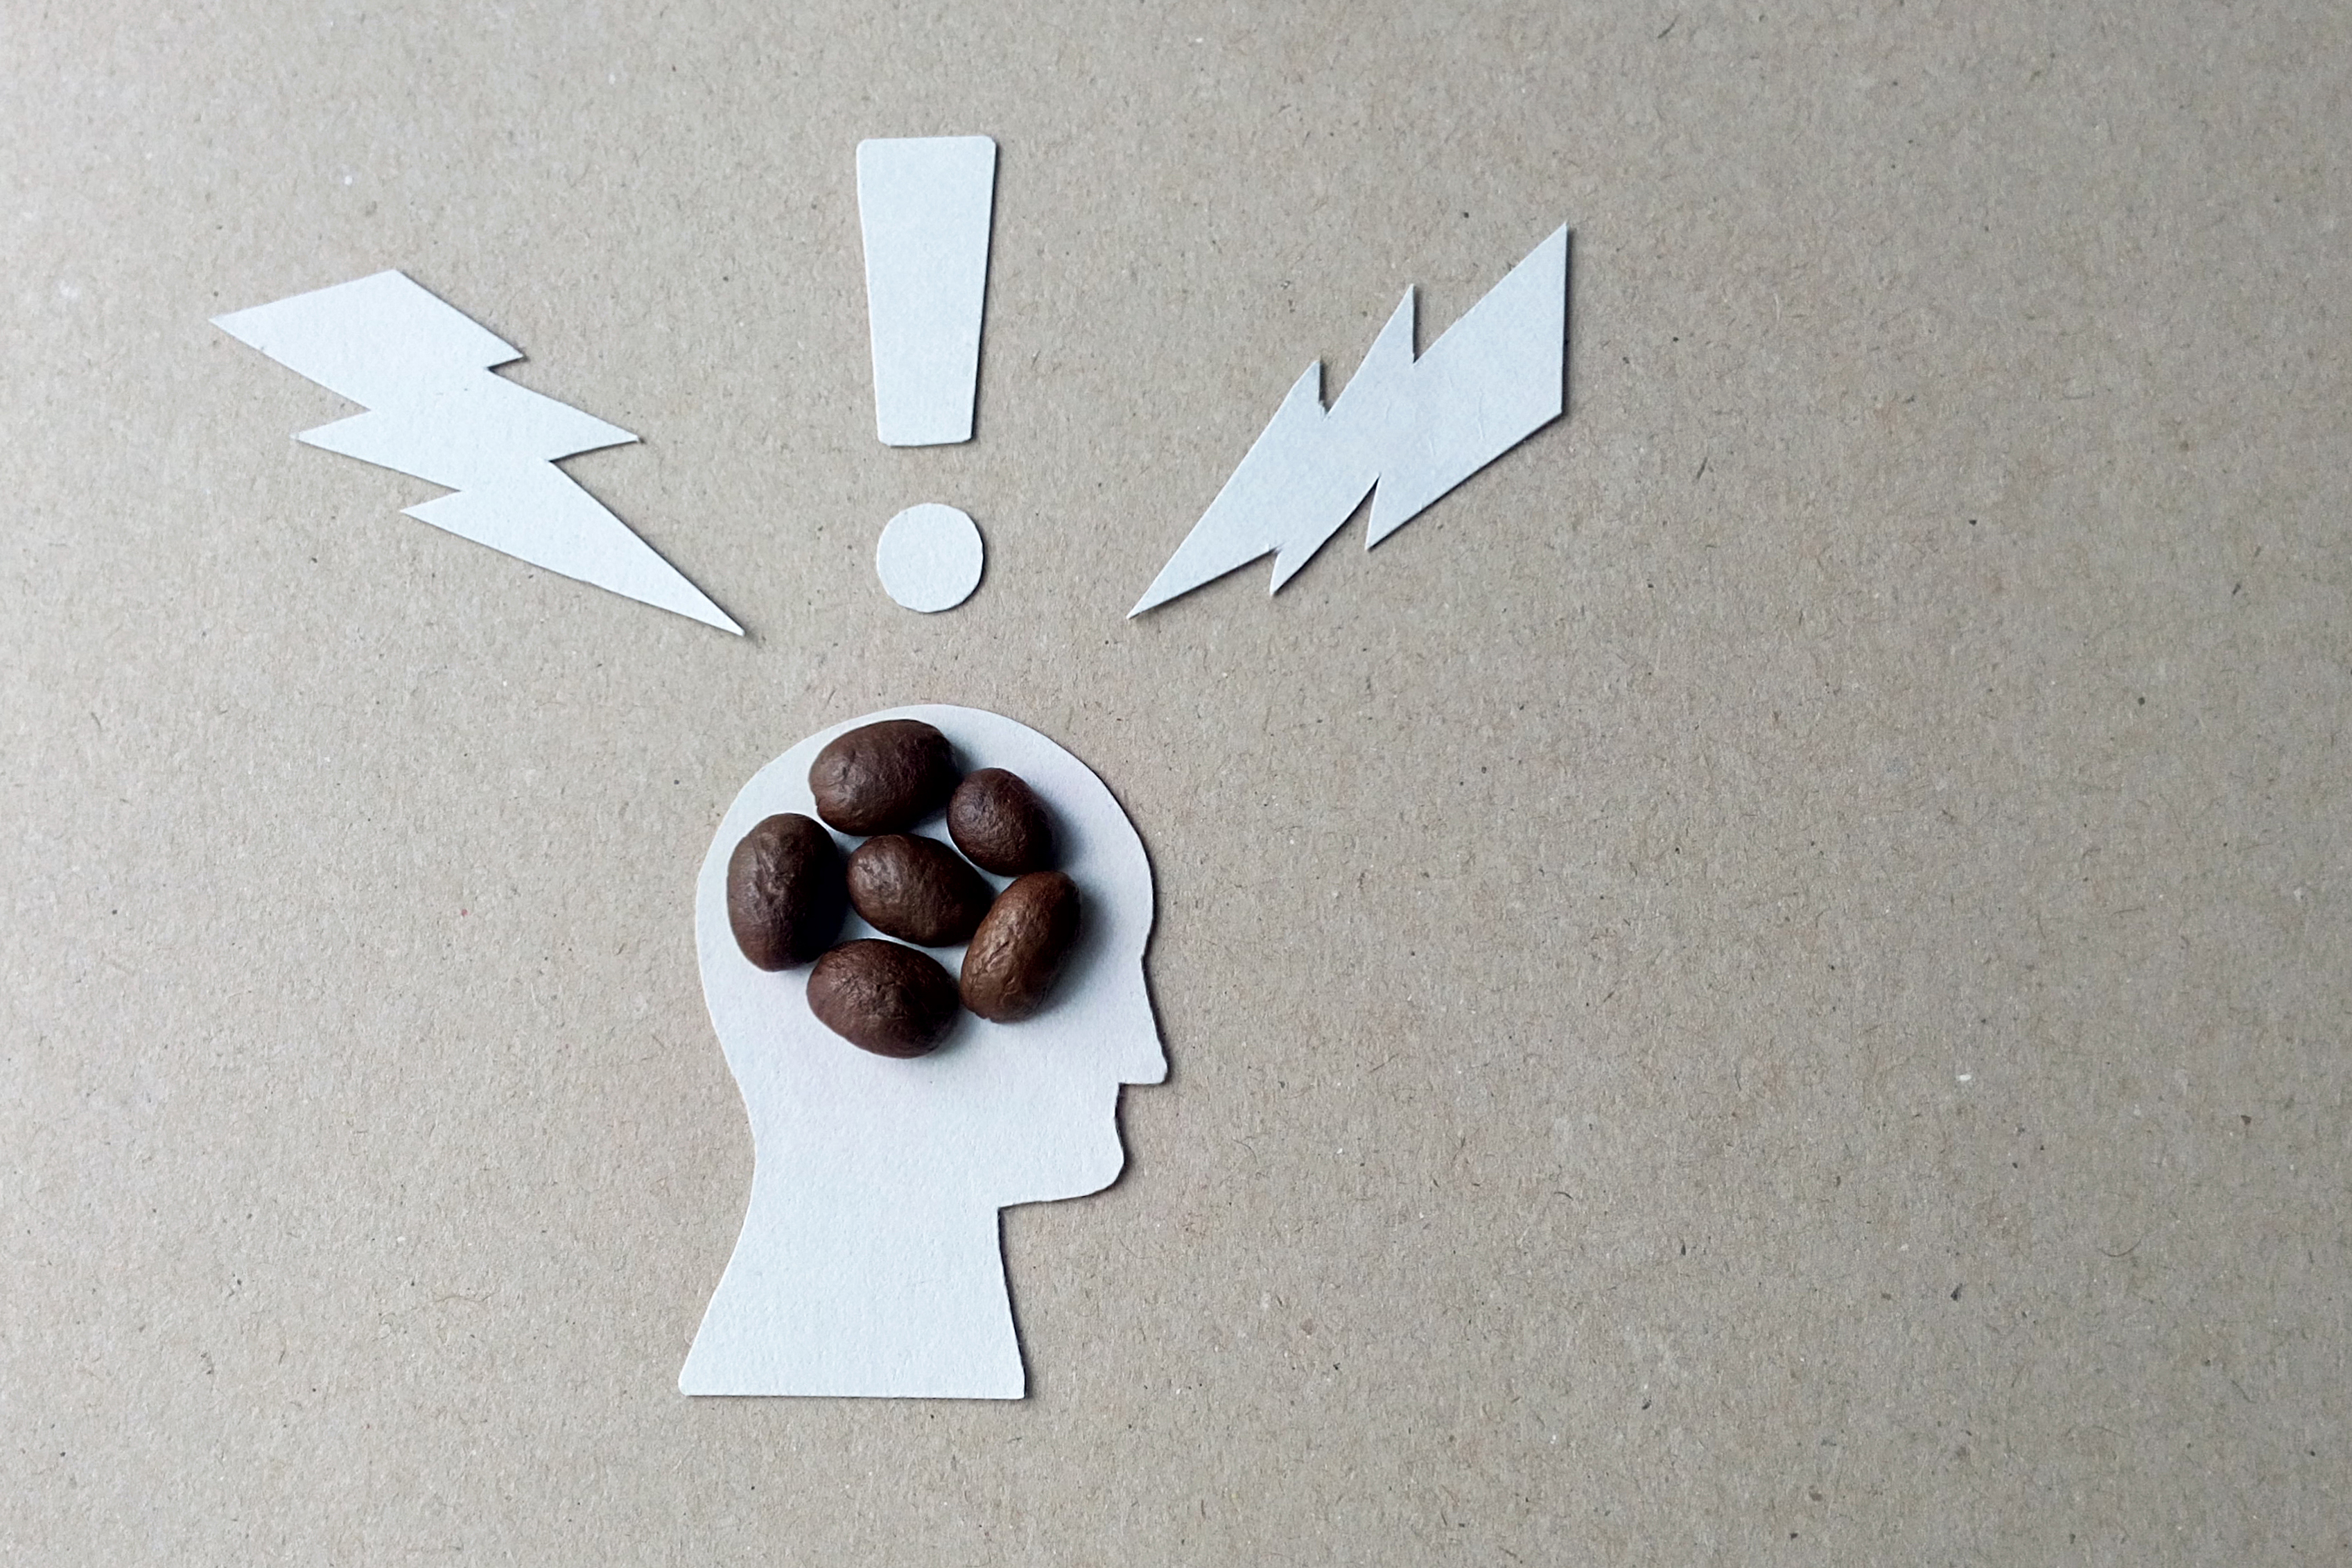 Caffeine affects our central nervous system